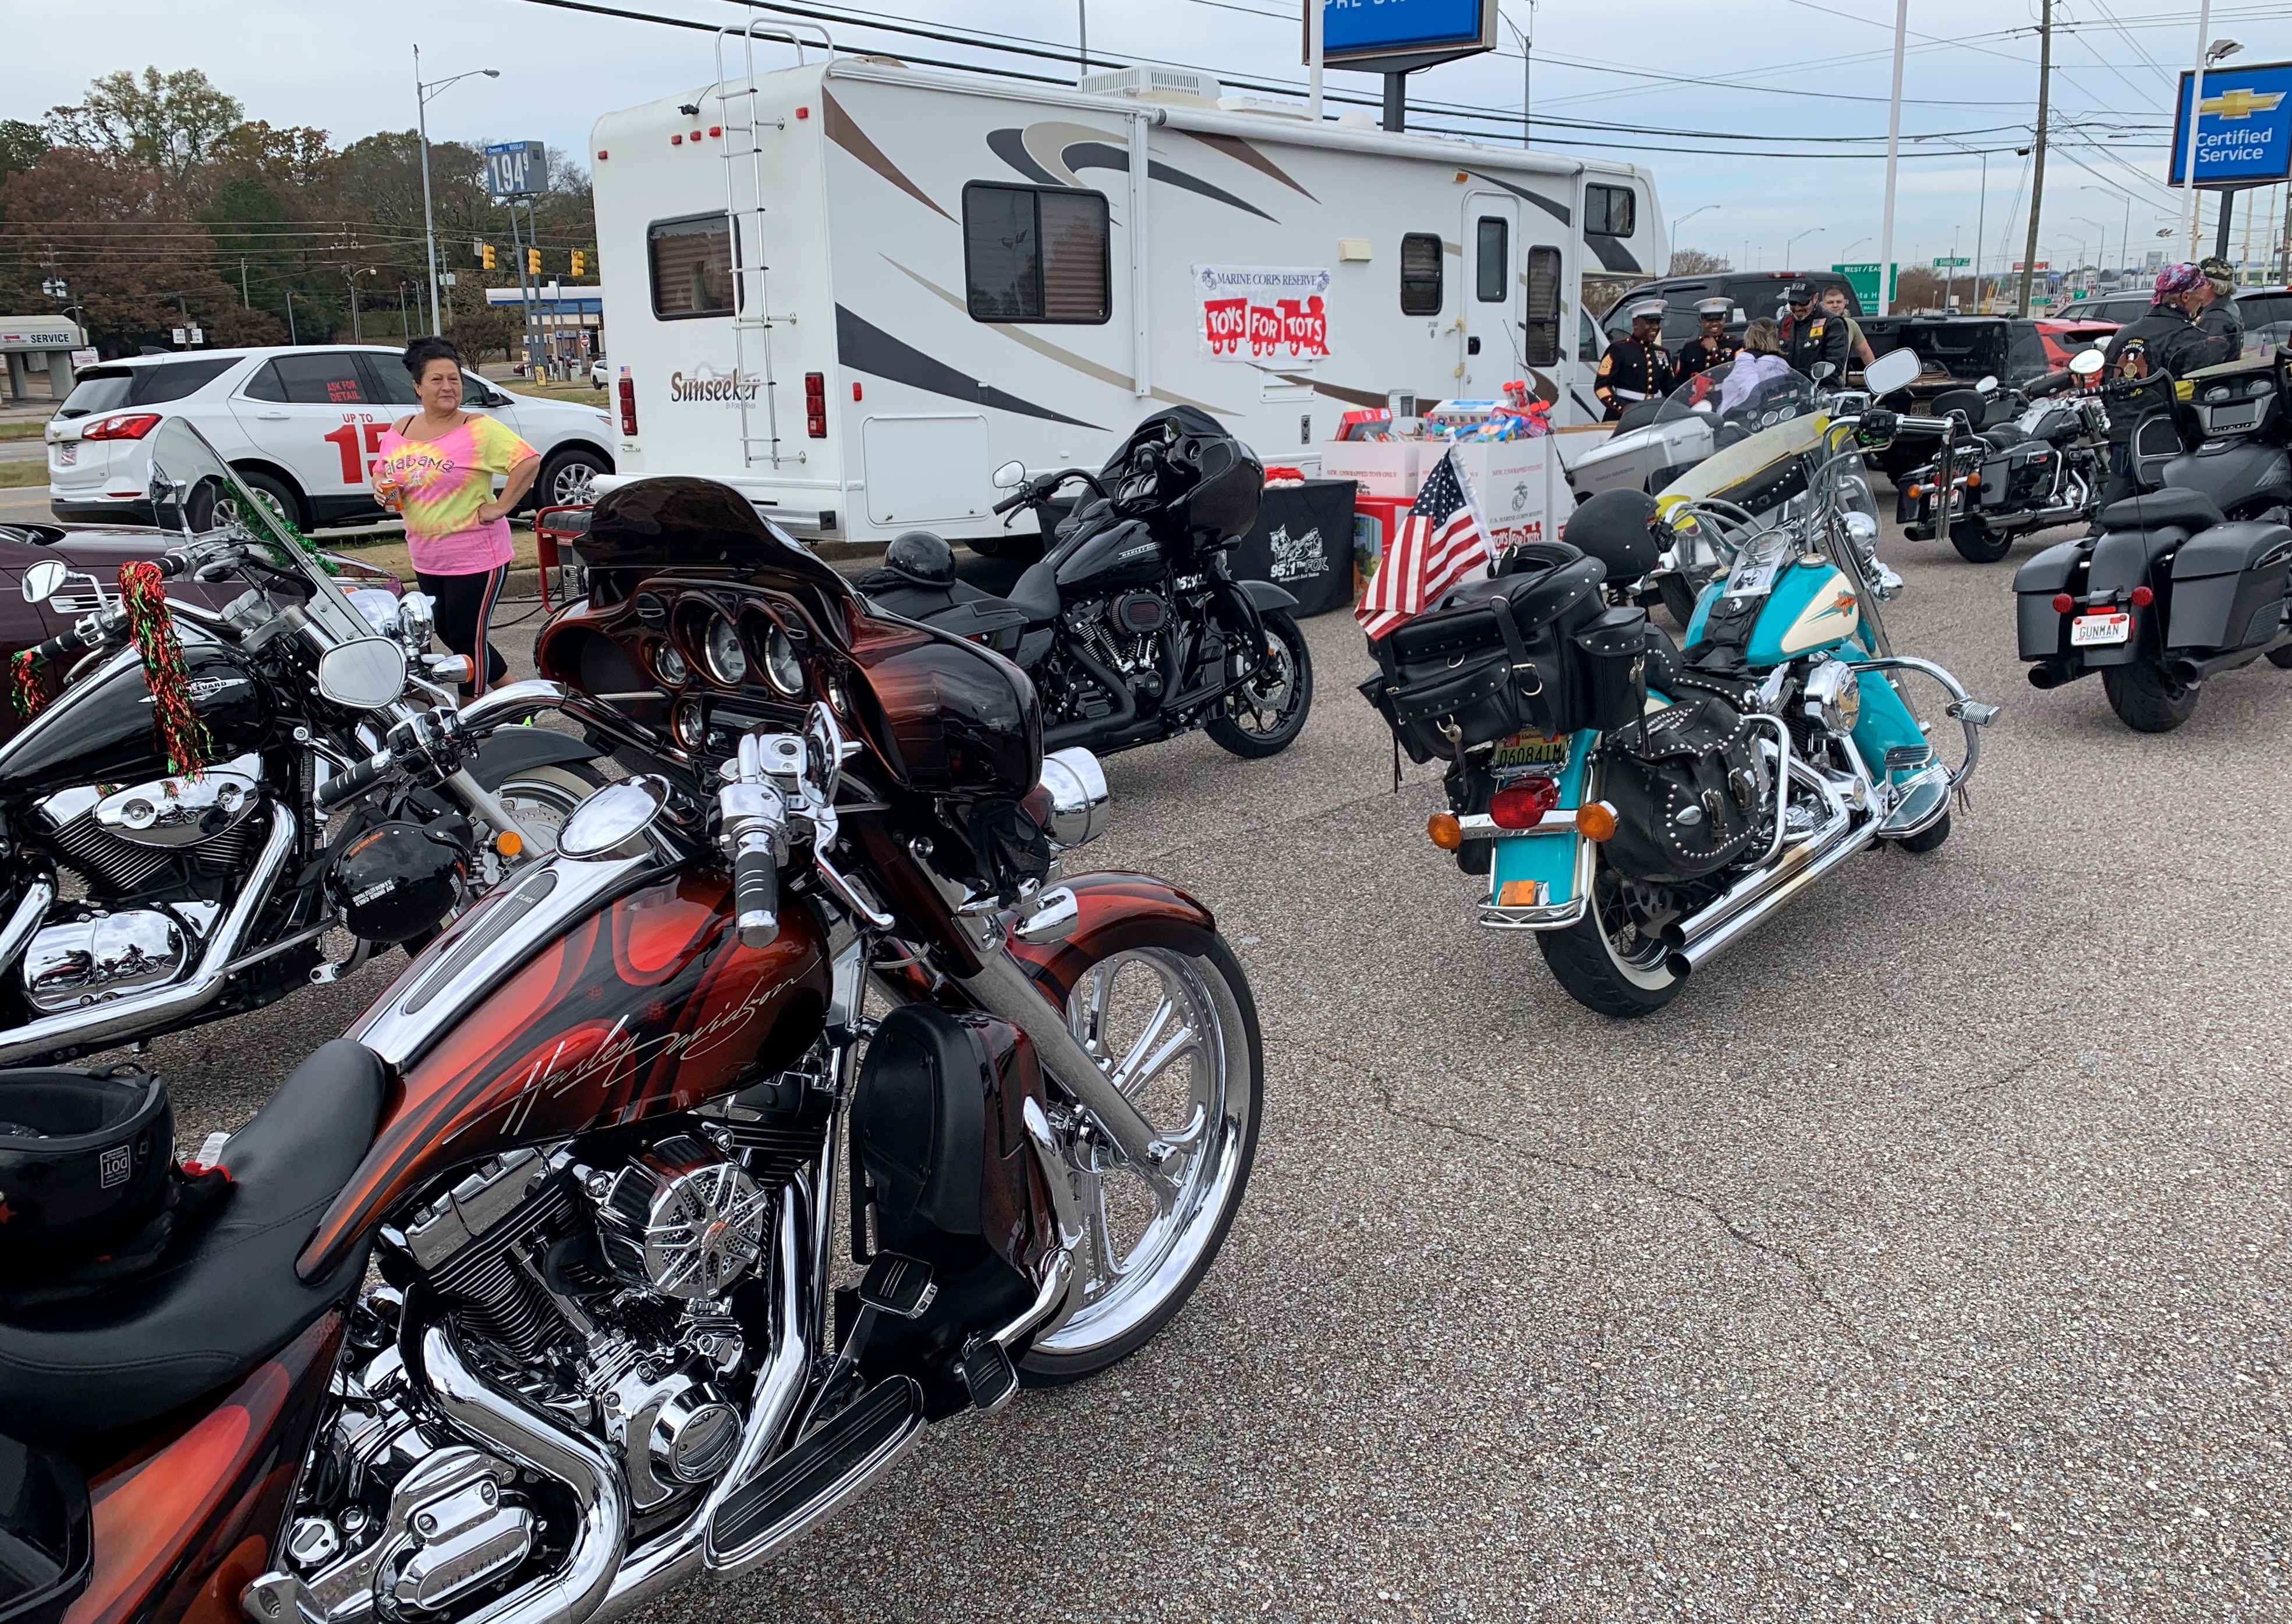 Local motorcycle club makes big 'Toys for Tots' donation